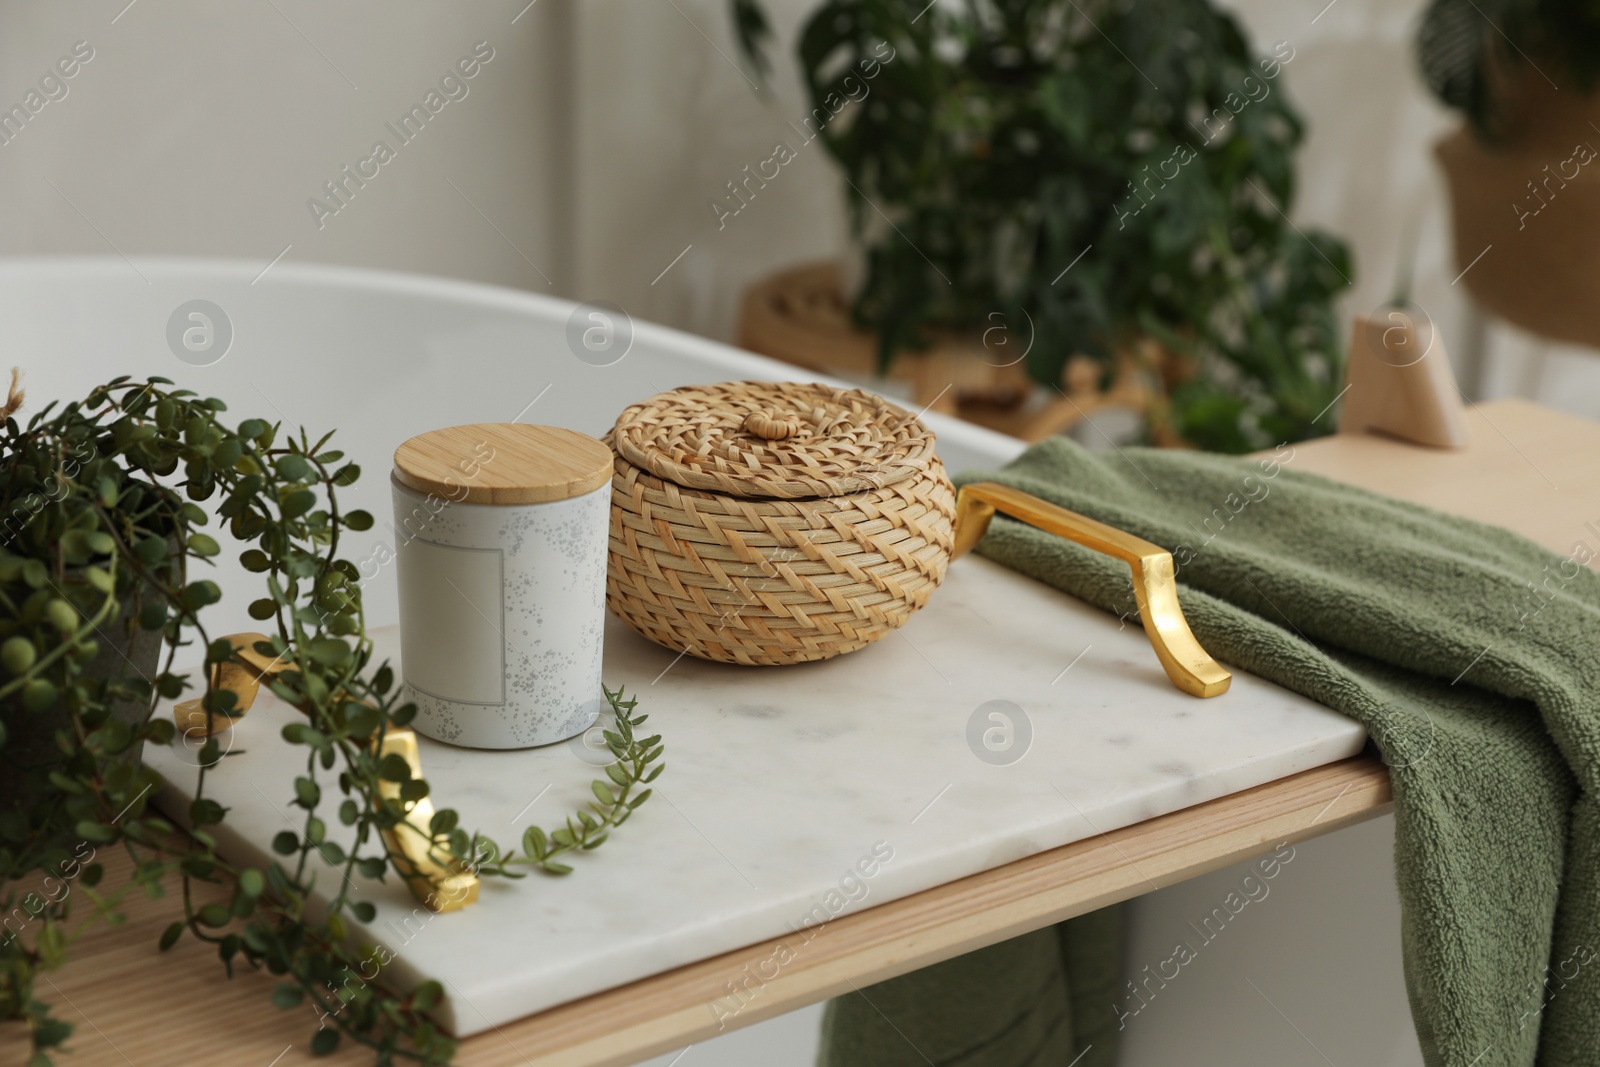 Photo of Tray with jar, wicker box, towel and green plant on bathtub indoors. Interior element